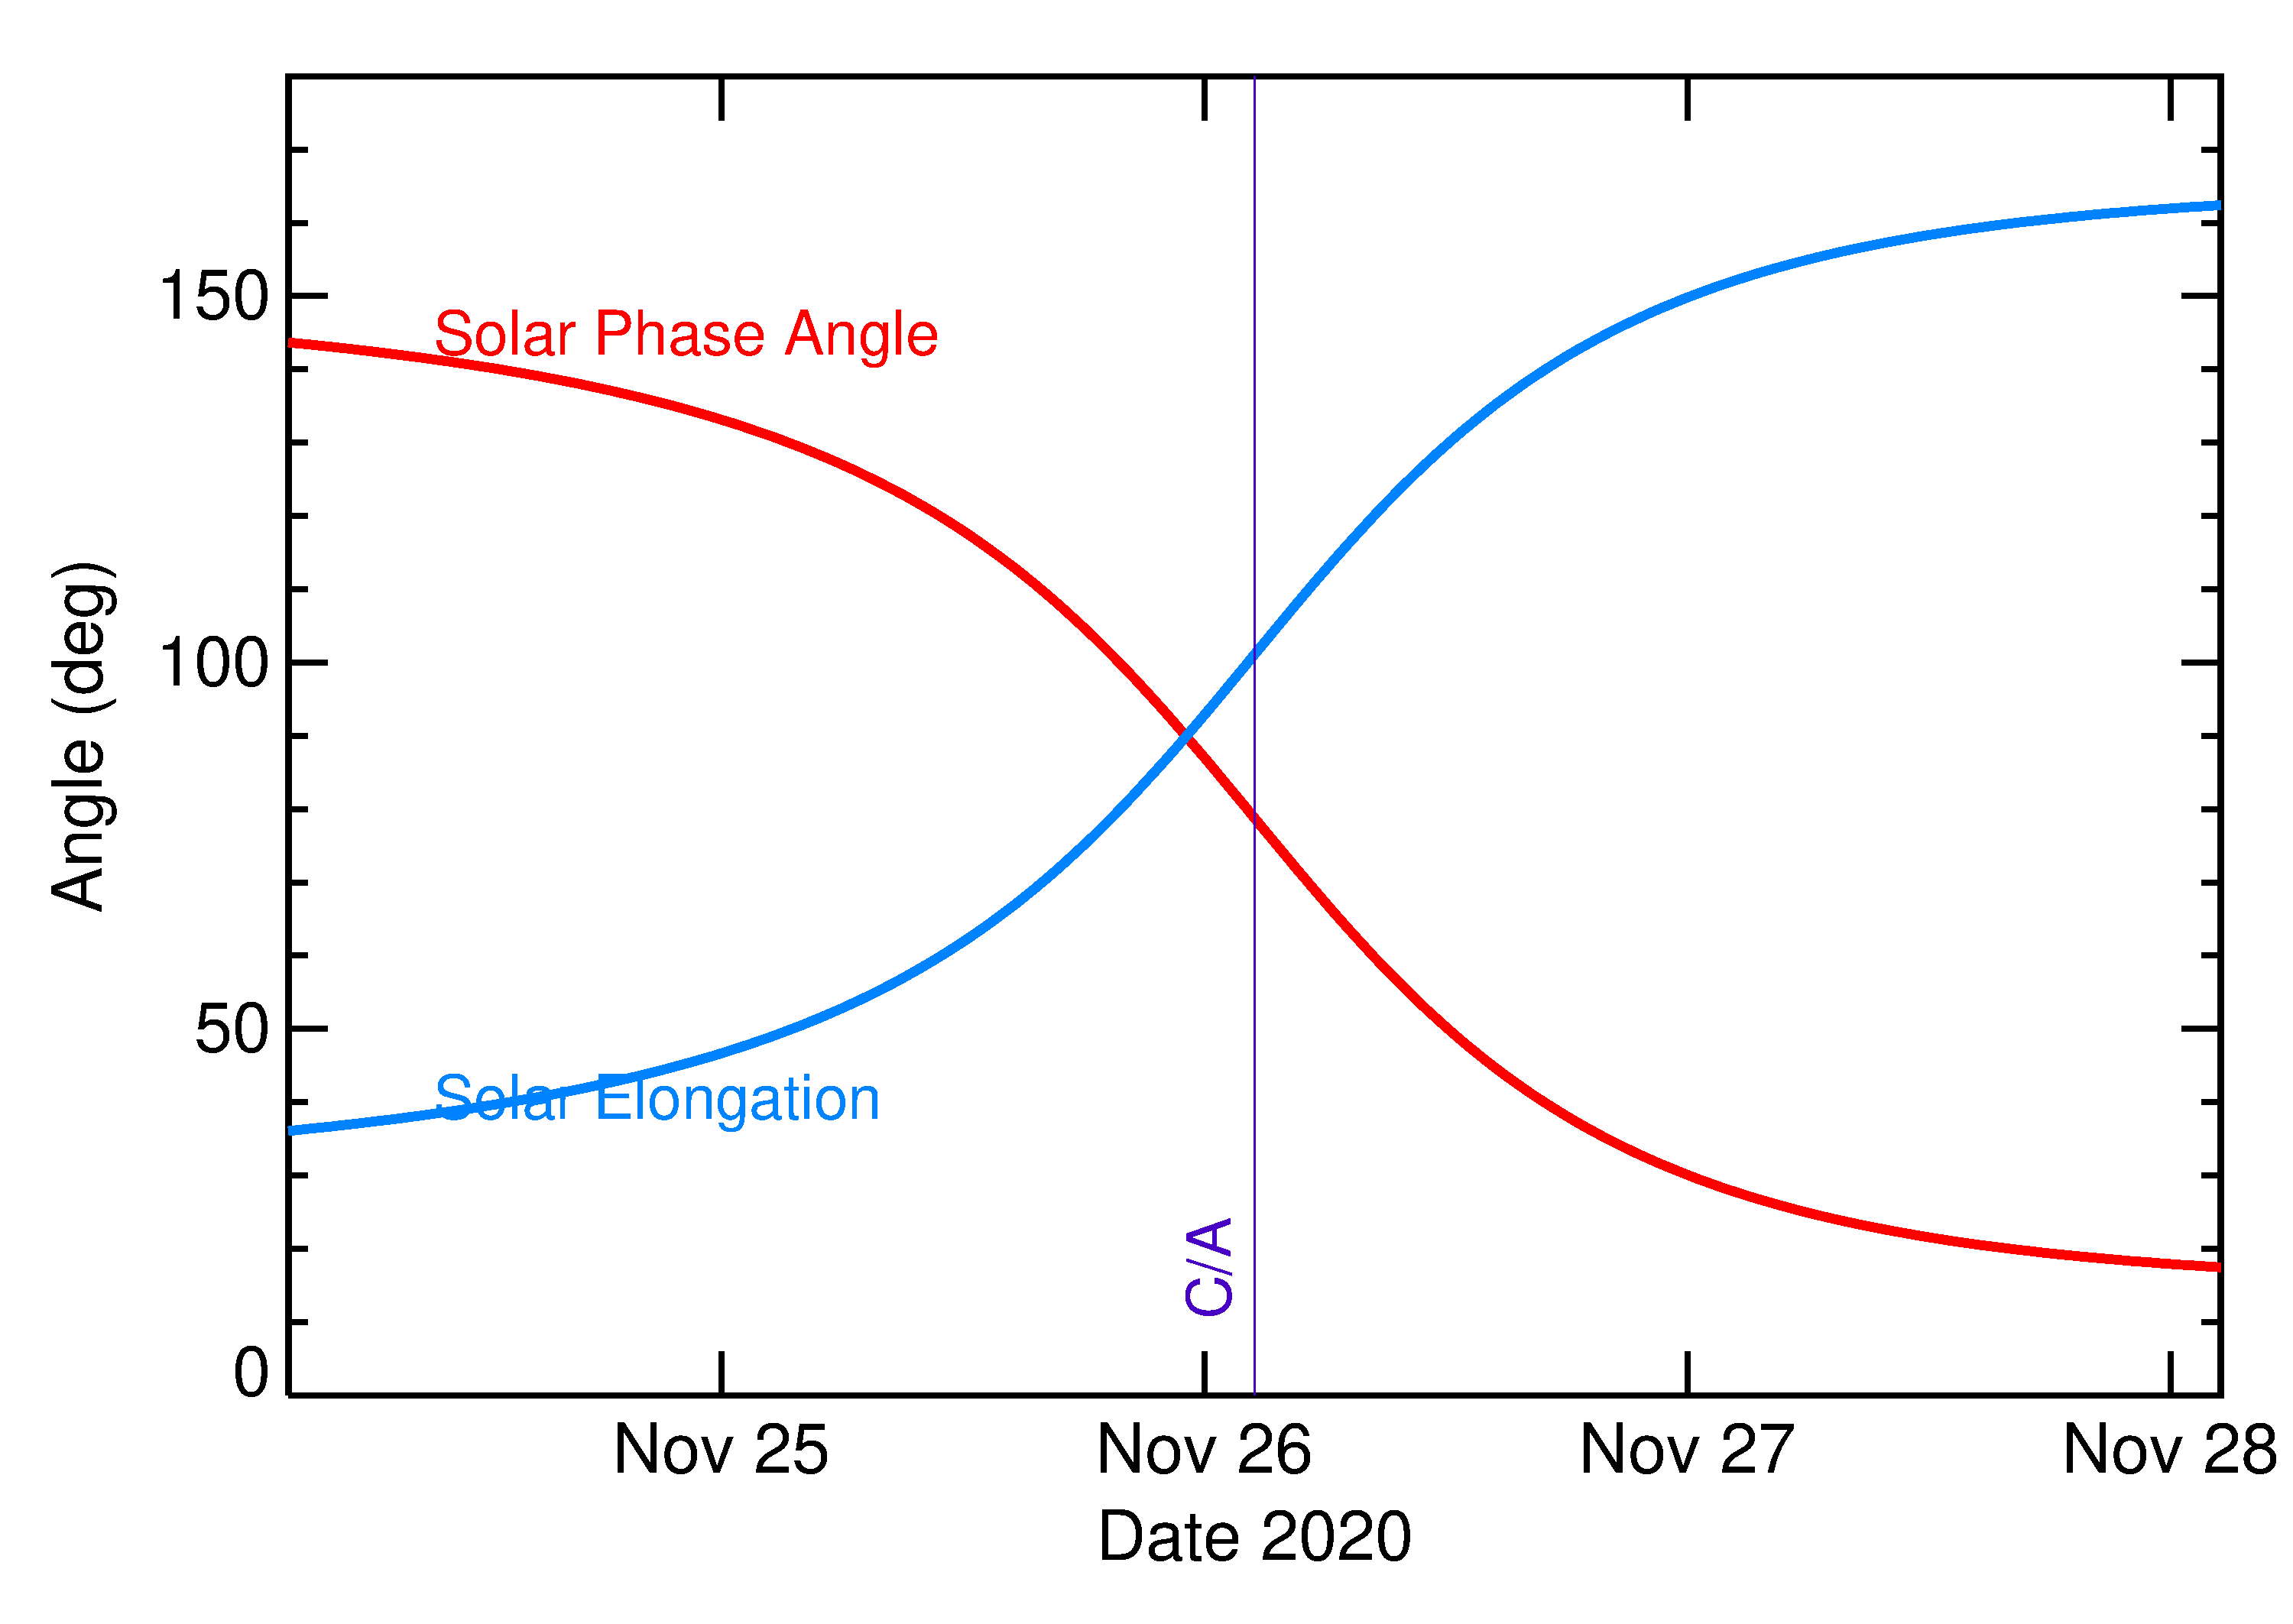 Solar Elongation and Solar Phase Angle of 2020 WG5 in the days around closest approach